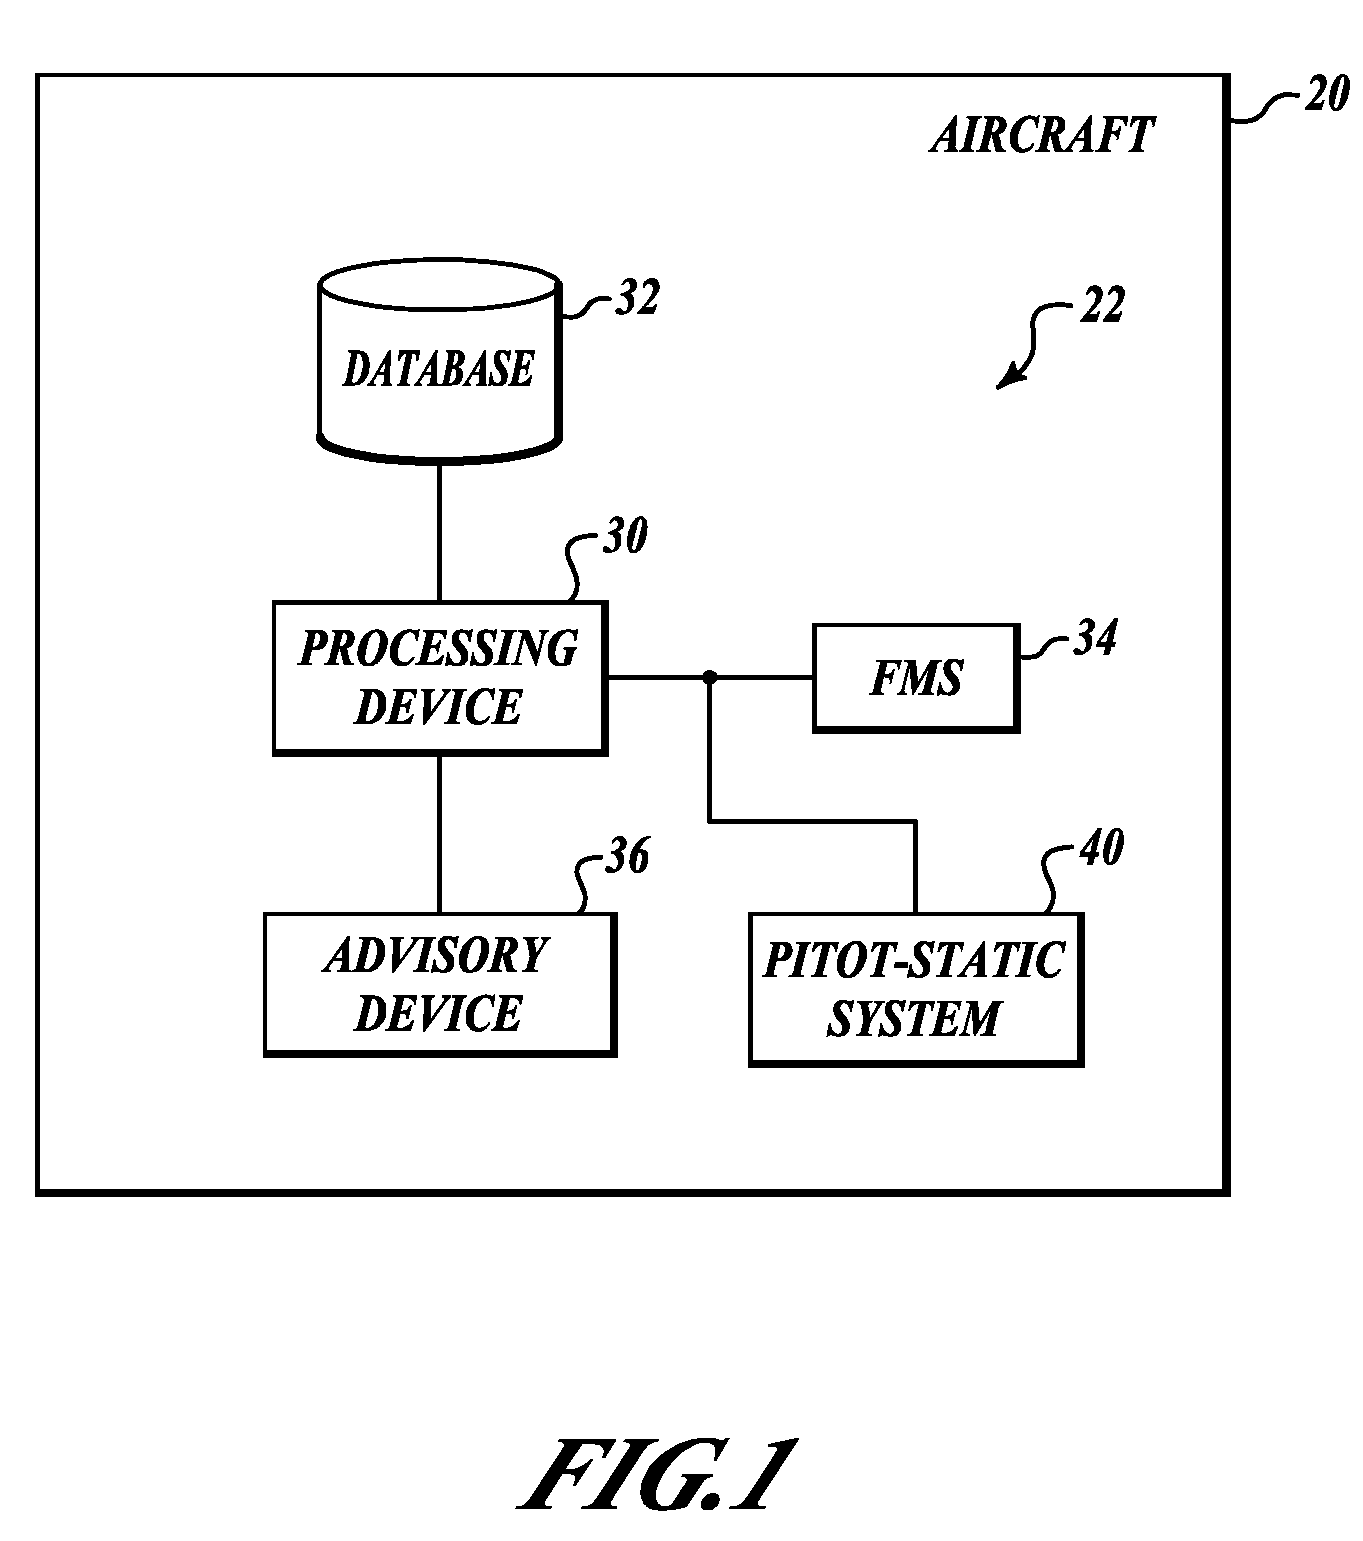 Systems and methods for detecting and alerting mis-setting of barometric altimeter setting during a transition altitude